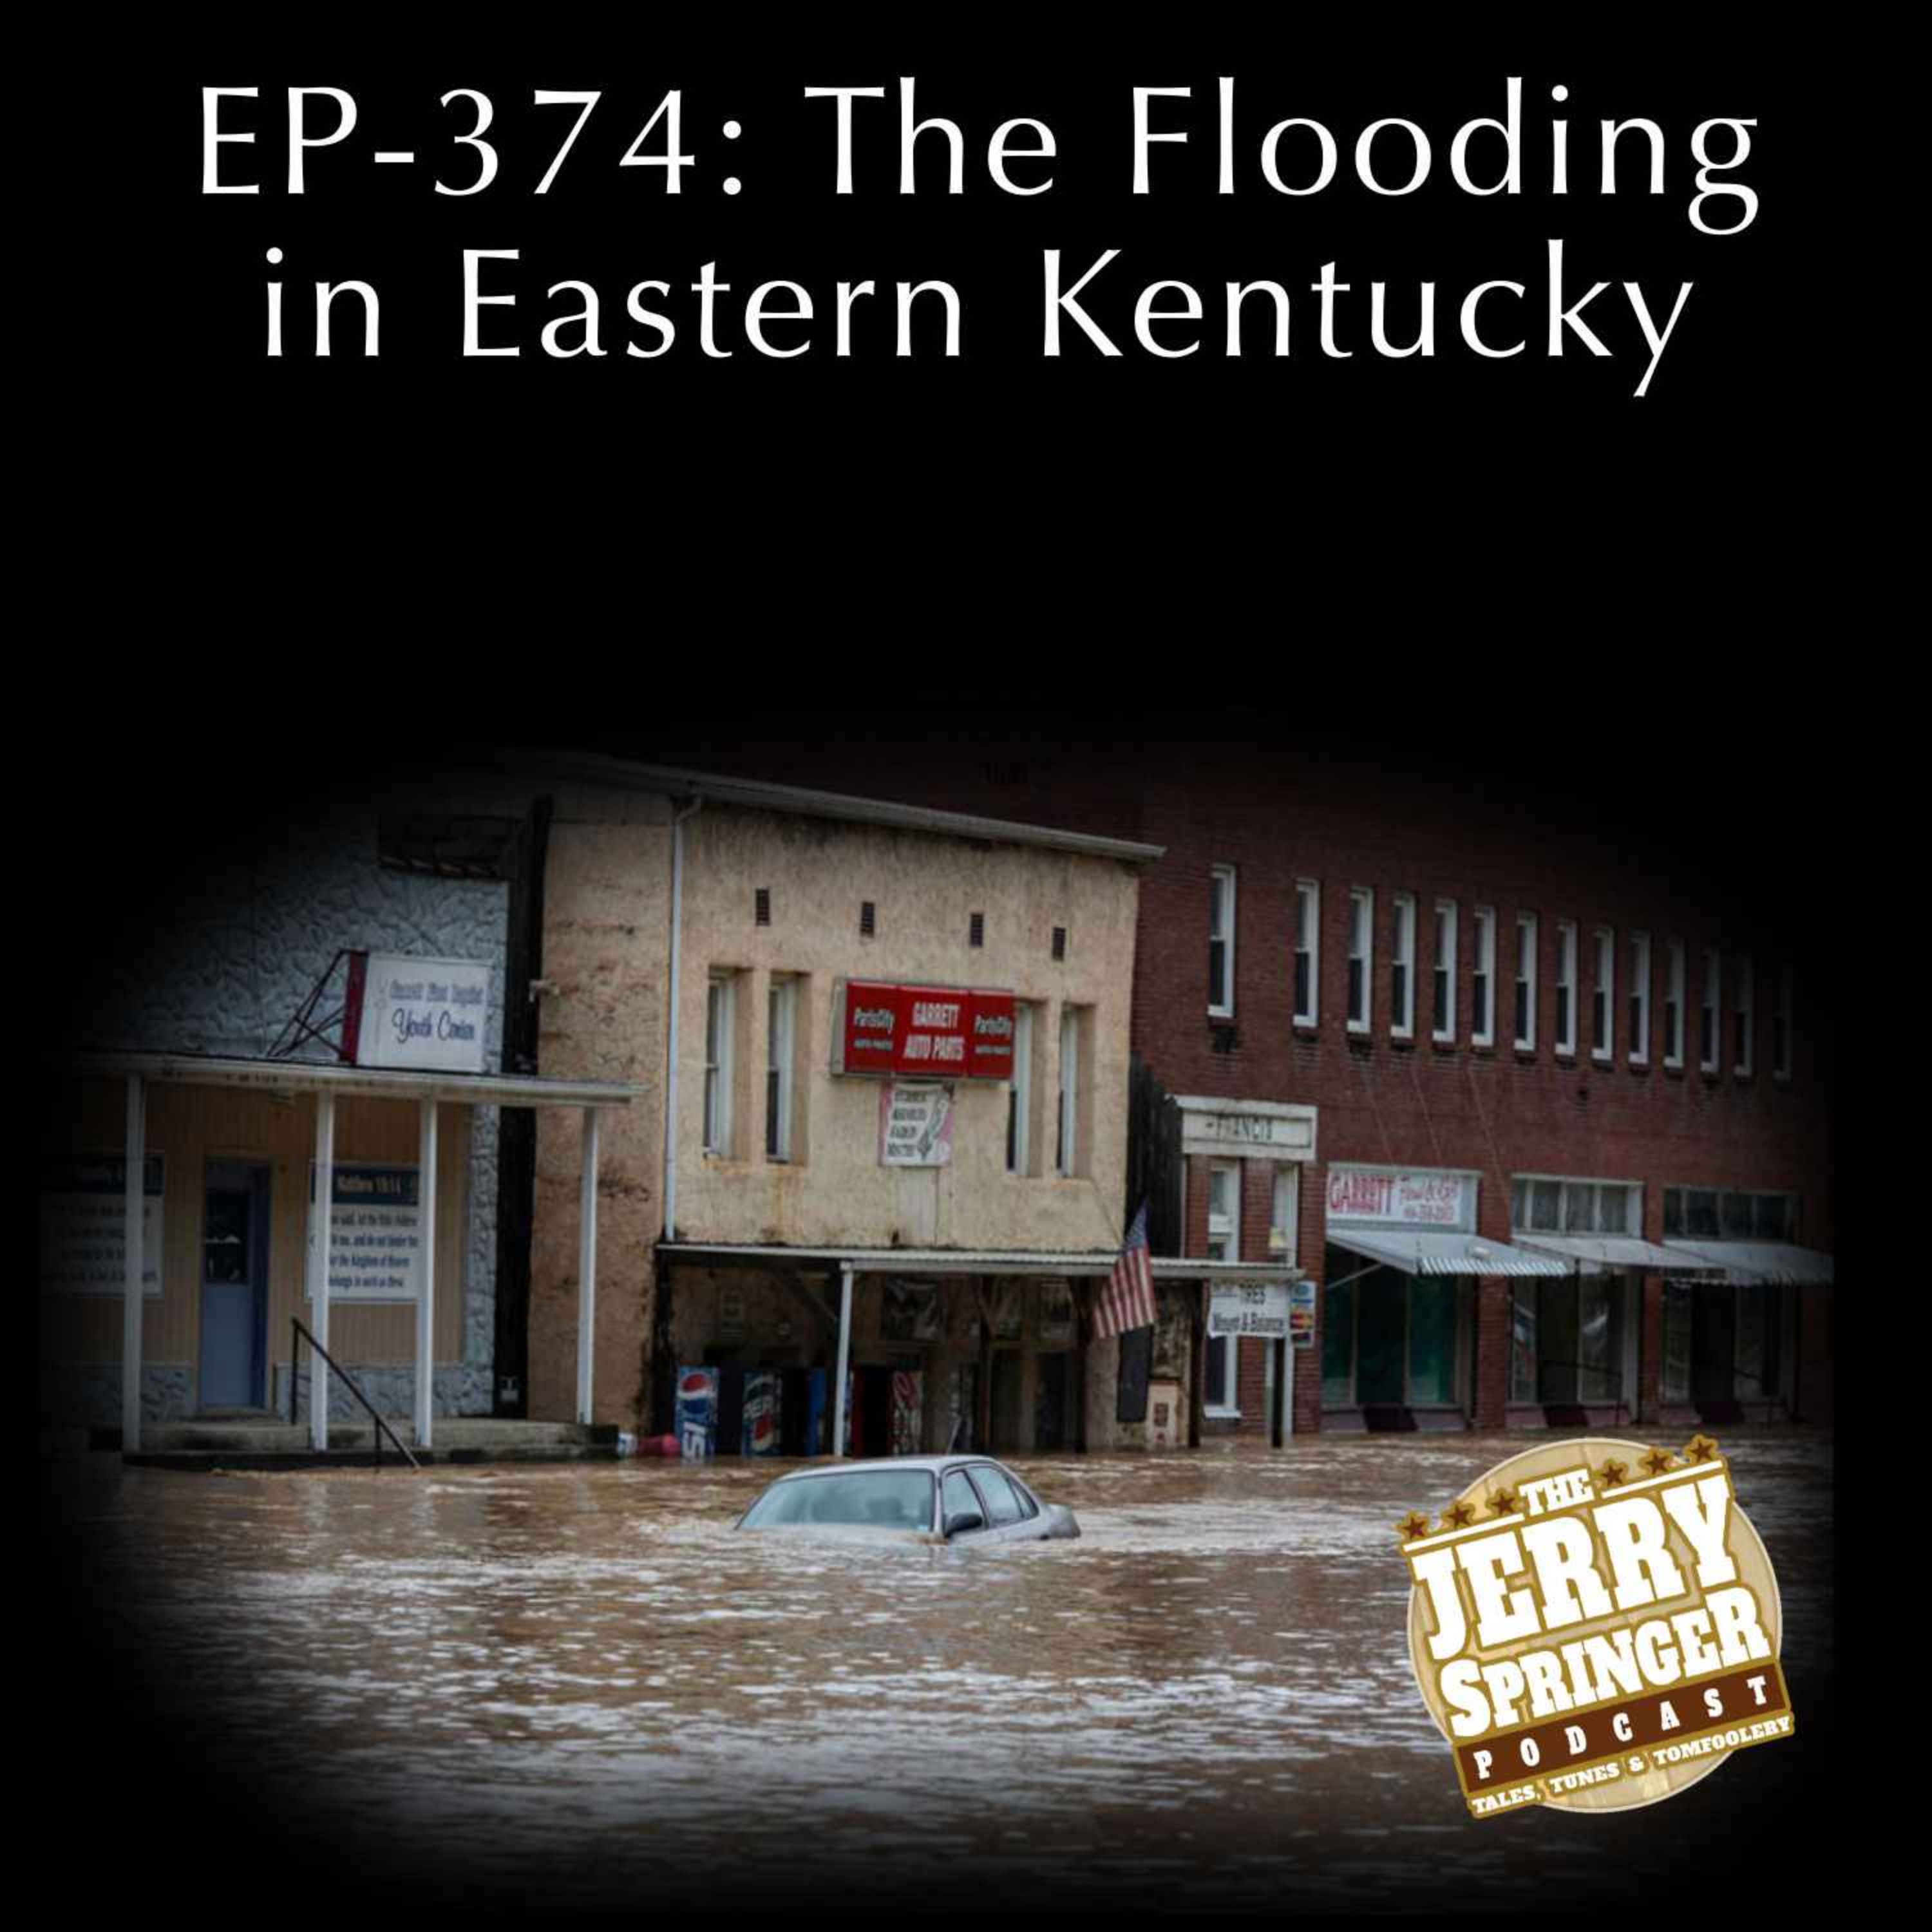 The Flooding in Eastern Kentucky: EP - 374